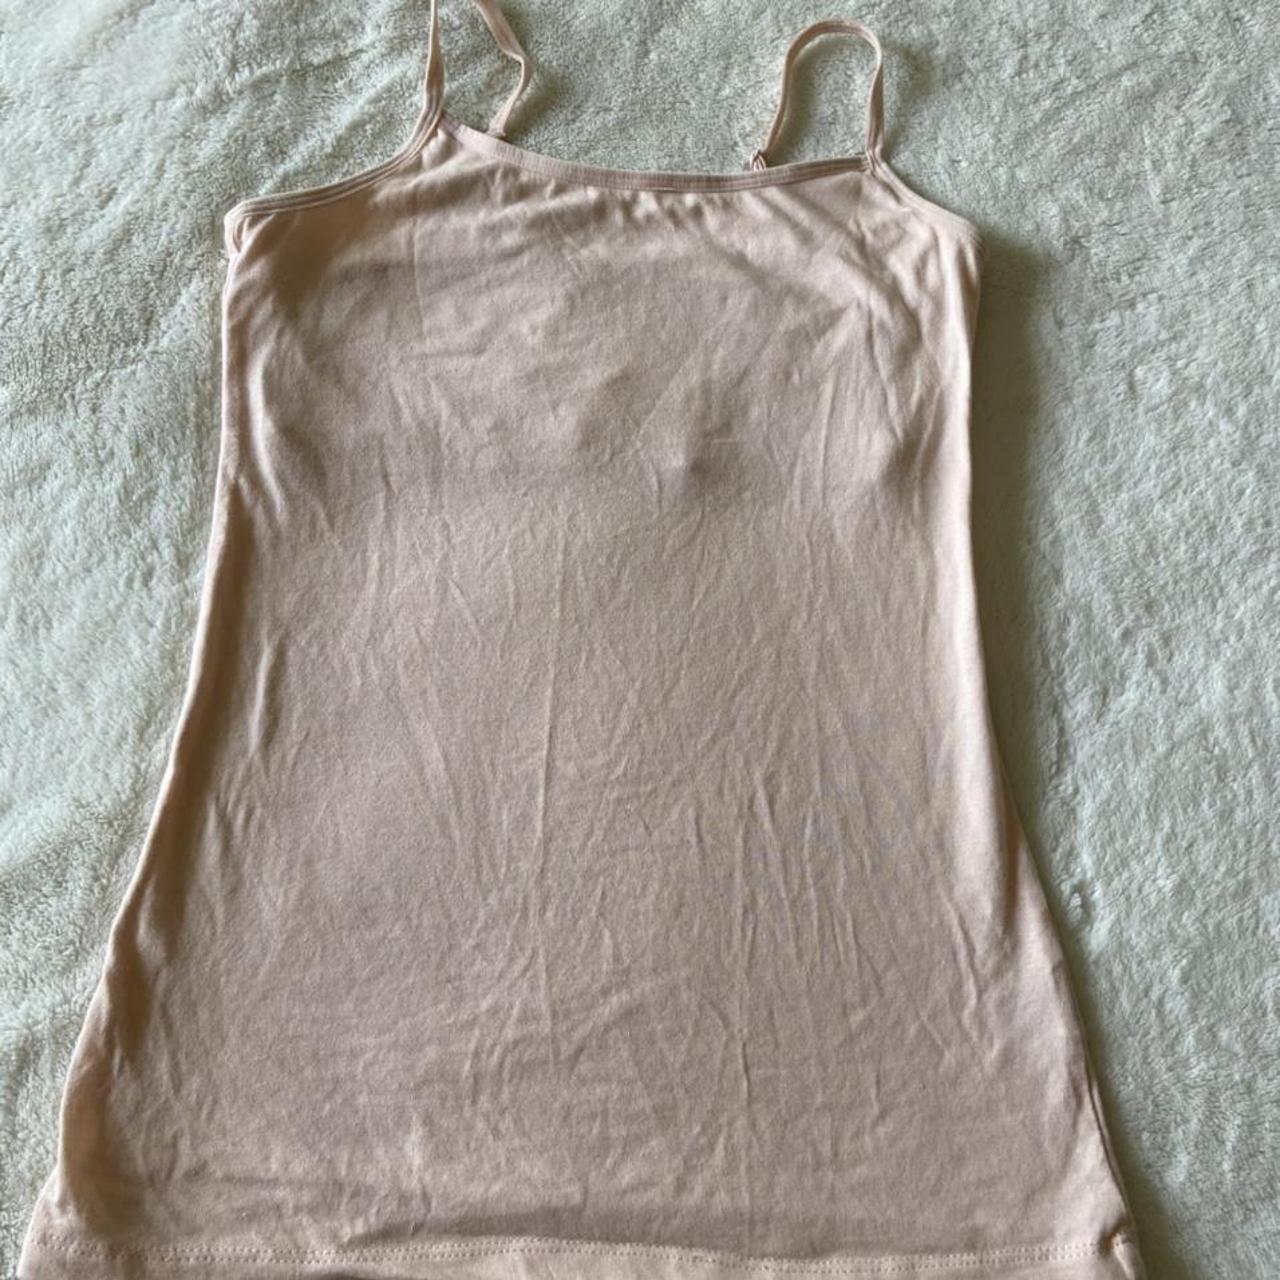 Product Image 1 - ♡ adorable pale pink cami